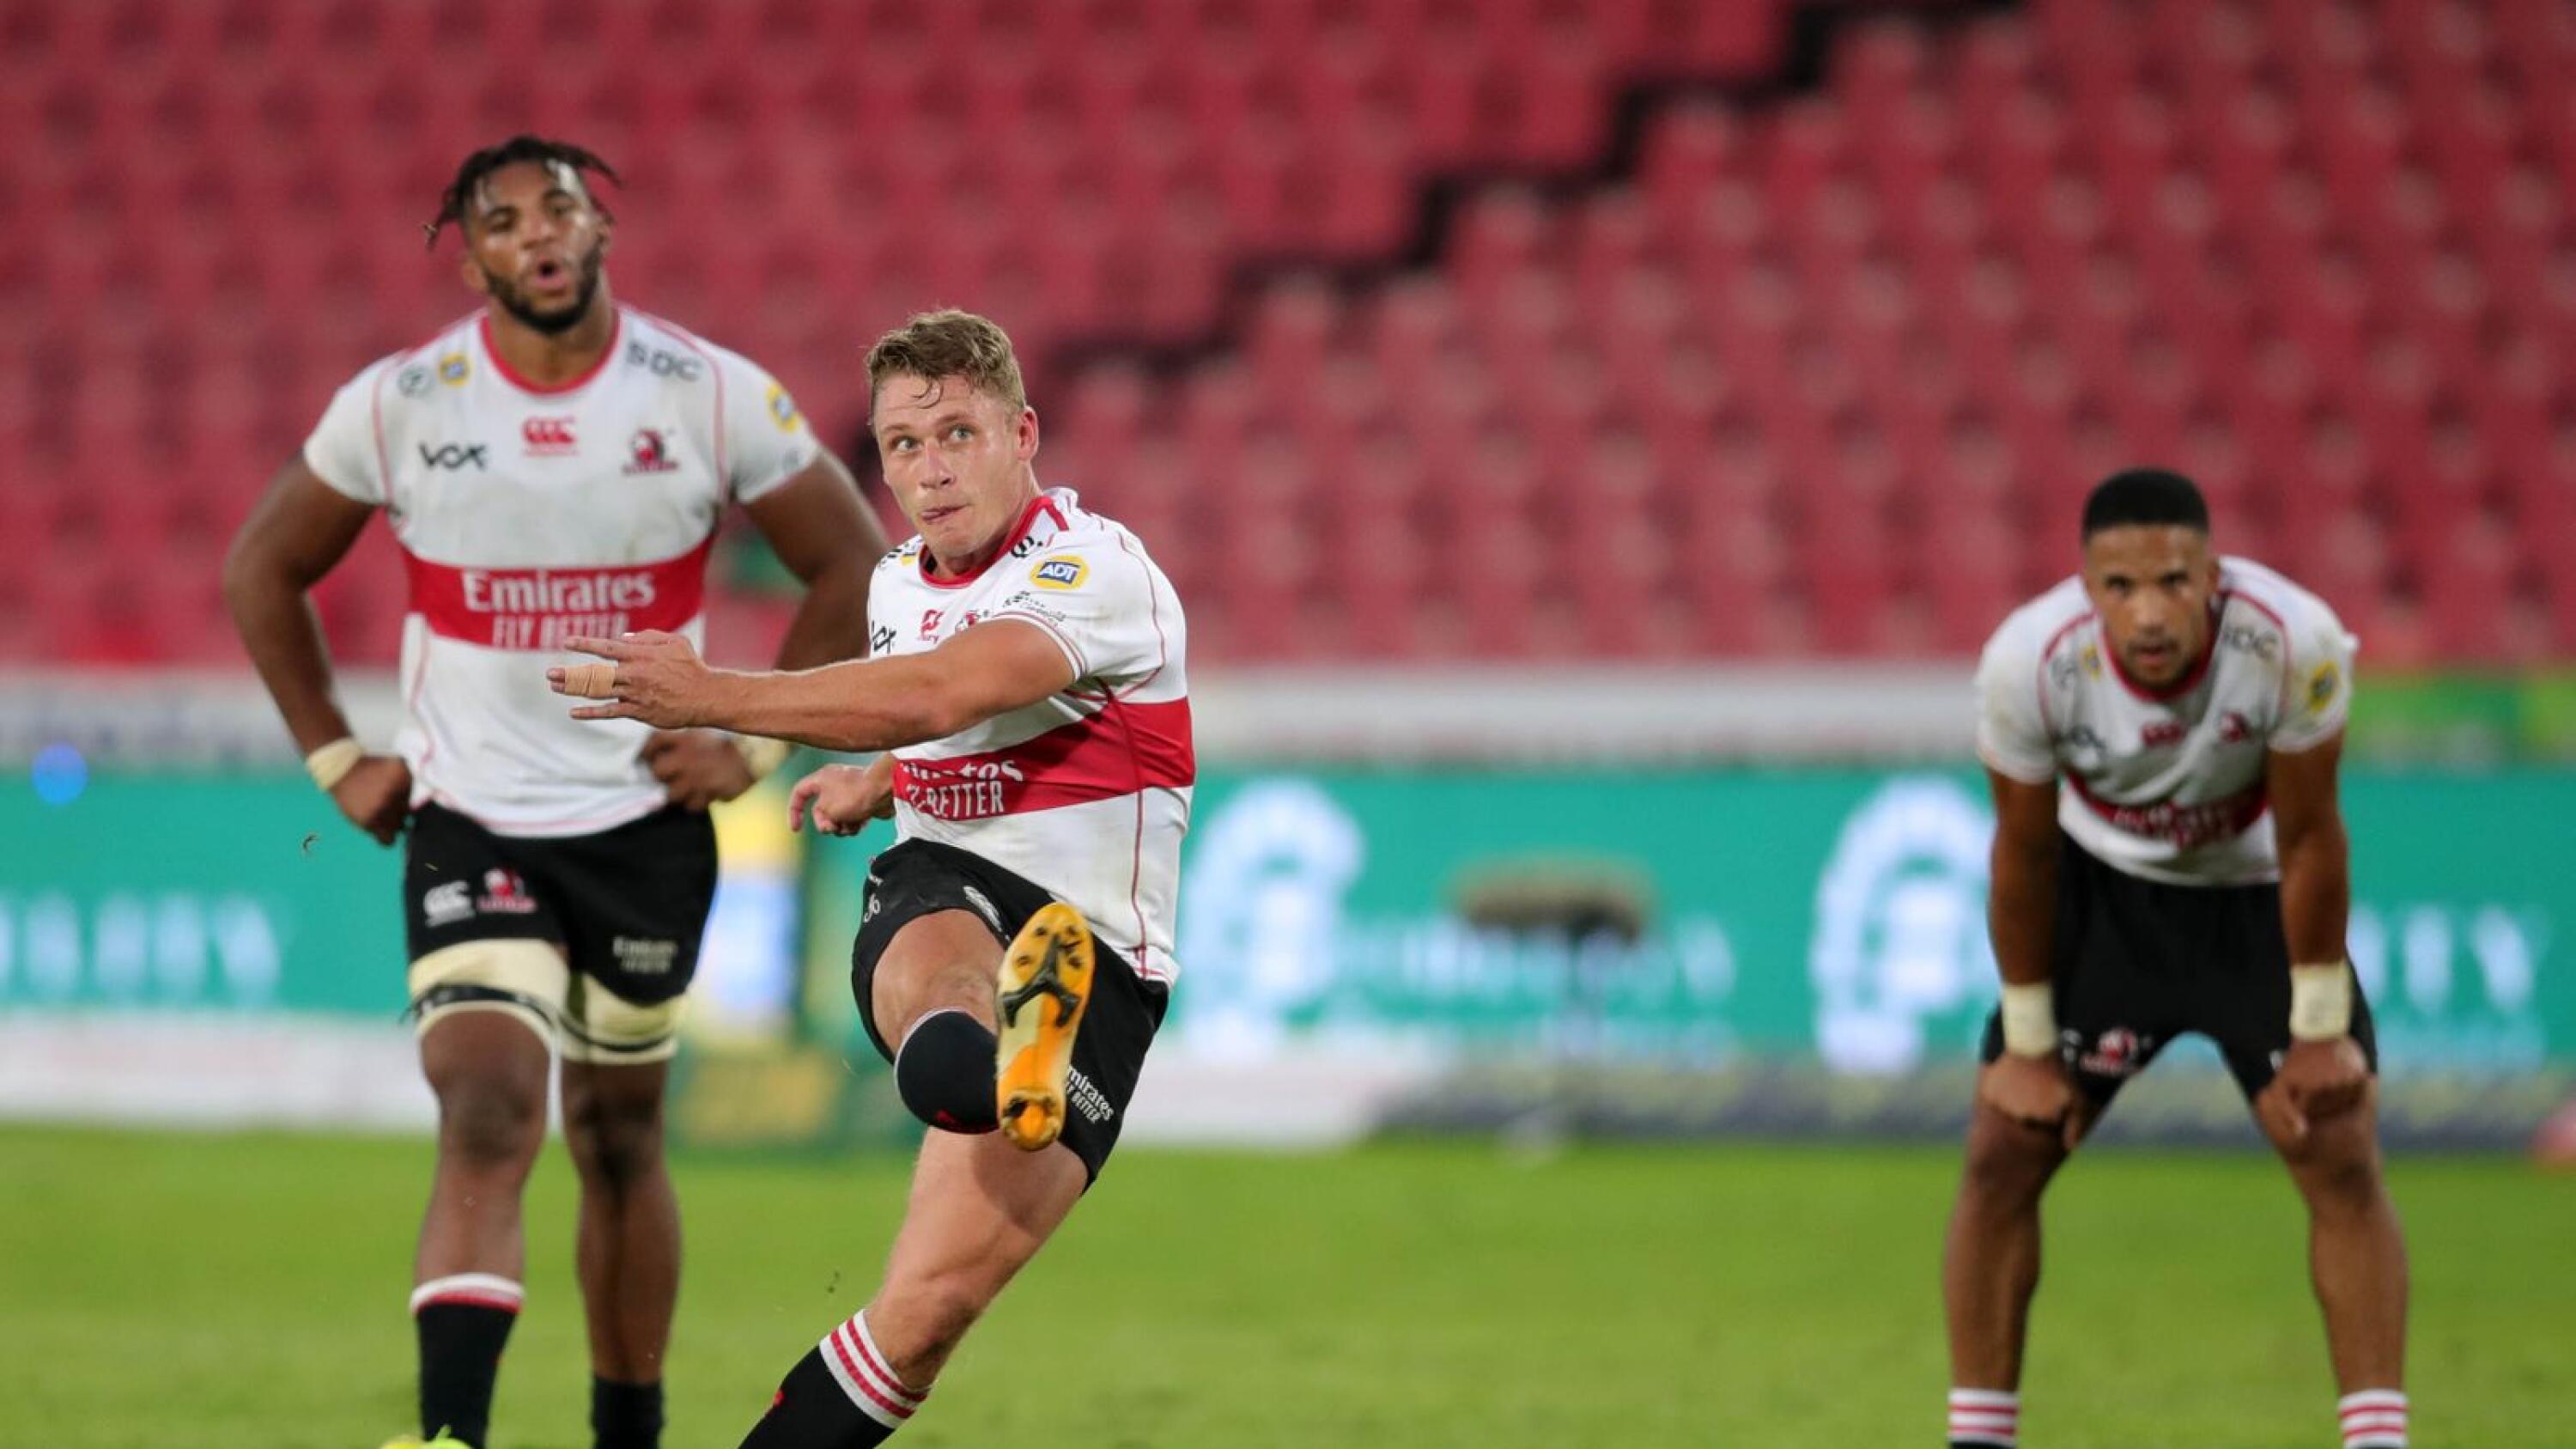 Tiaan Swanepoel scored 18 points as the Lions beat Western Province at Ellis Park on Saturday to secure their first win of the Currie Cup season